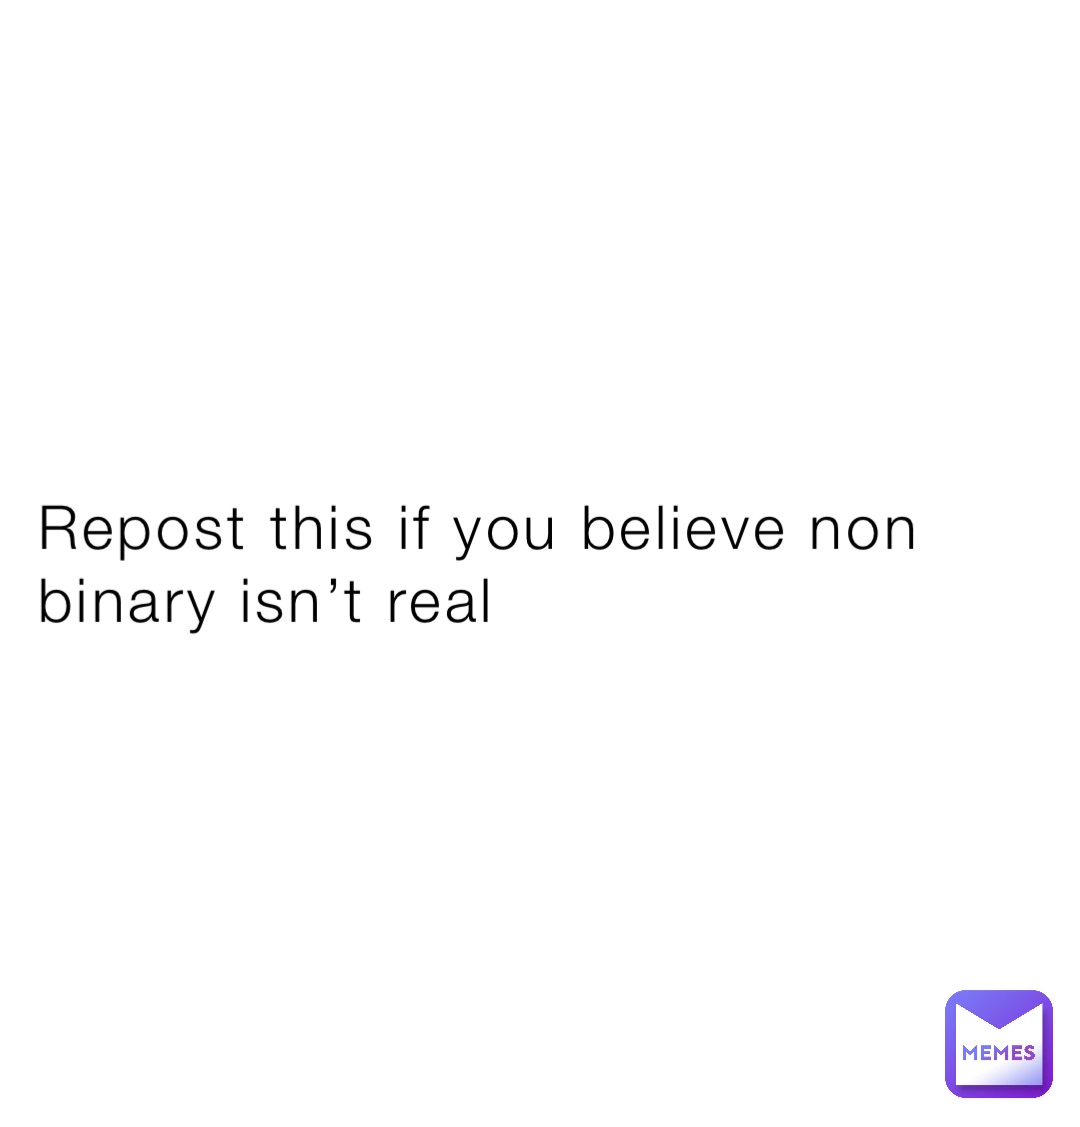 Repost this if you believe non binary isn’t real